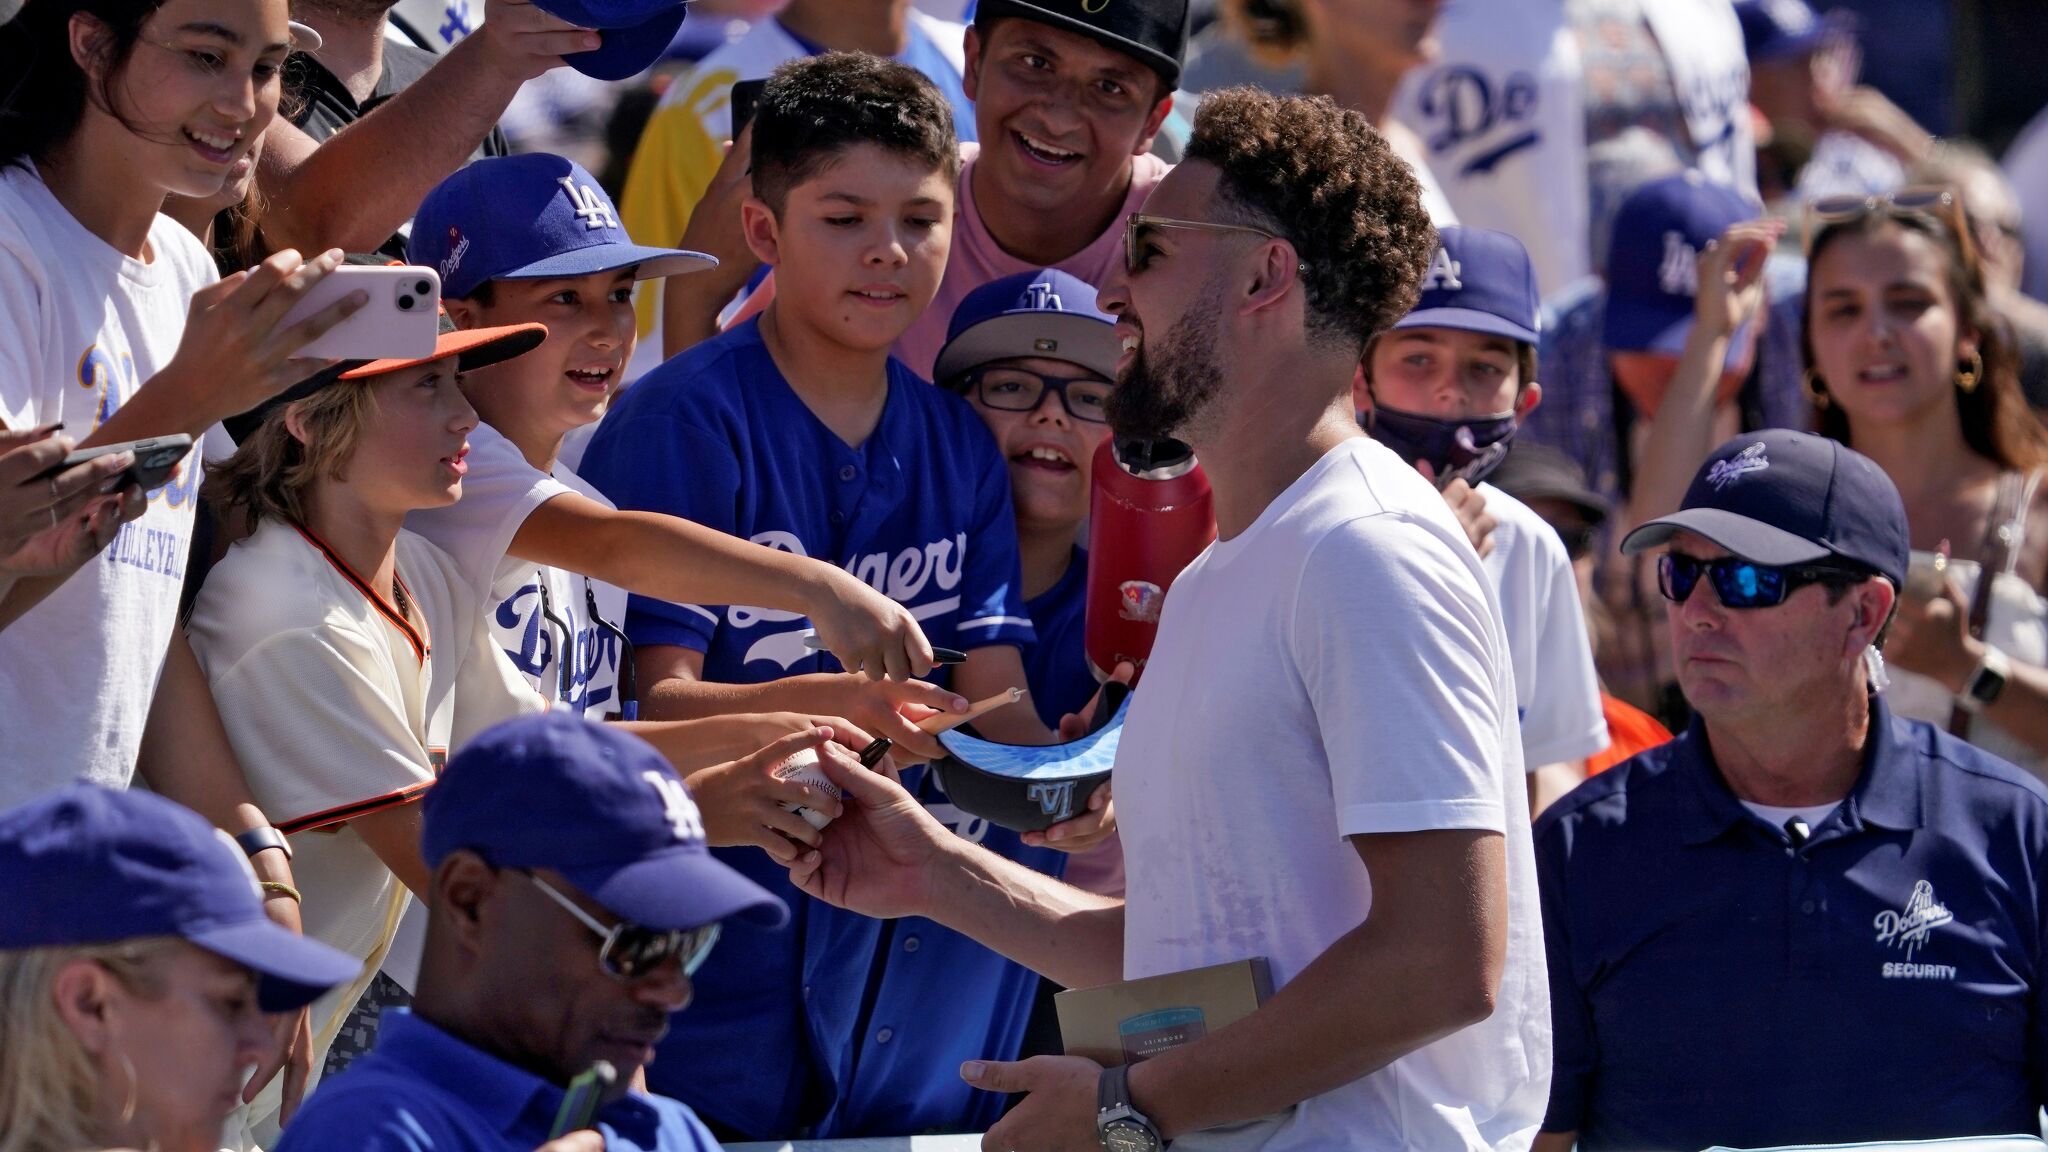 Klay Thompson gets hypnotized by magician at Dodgers Stadium